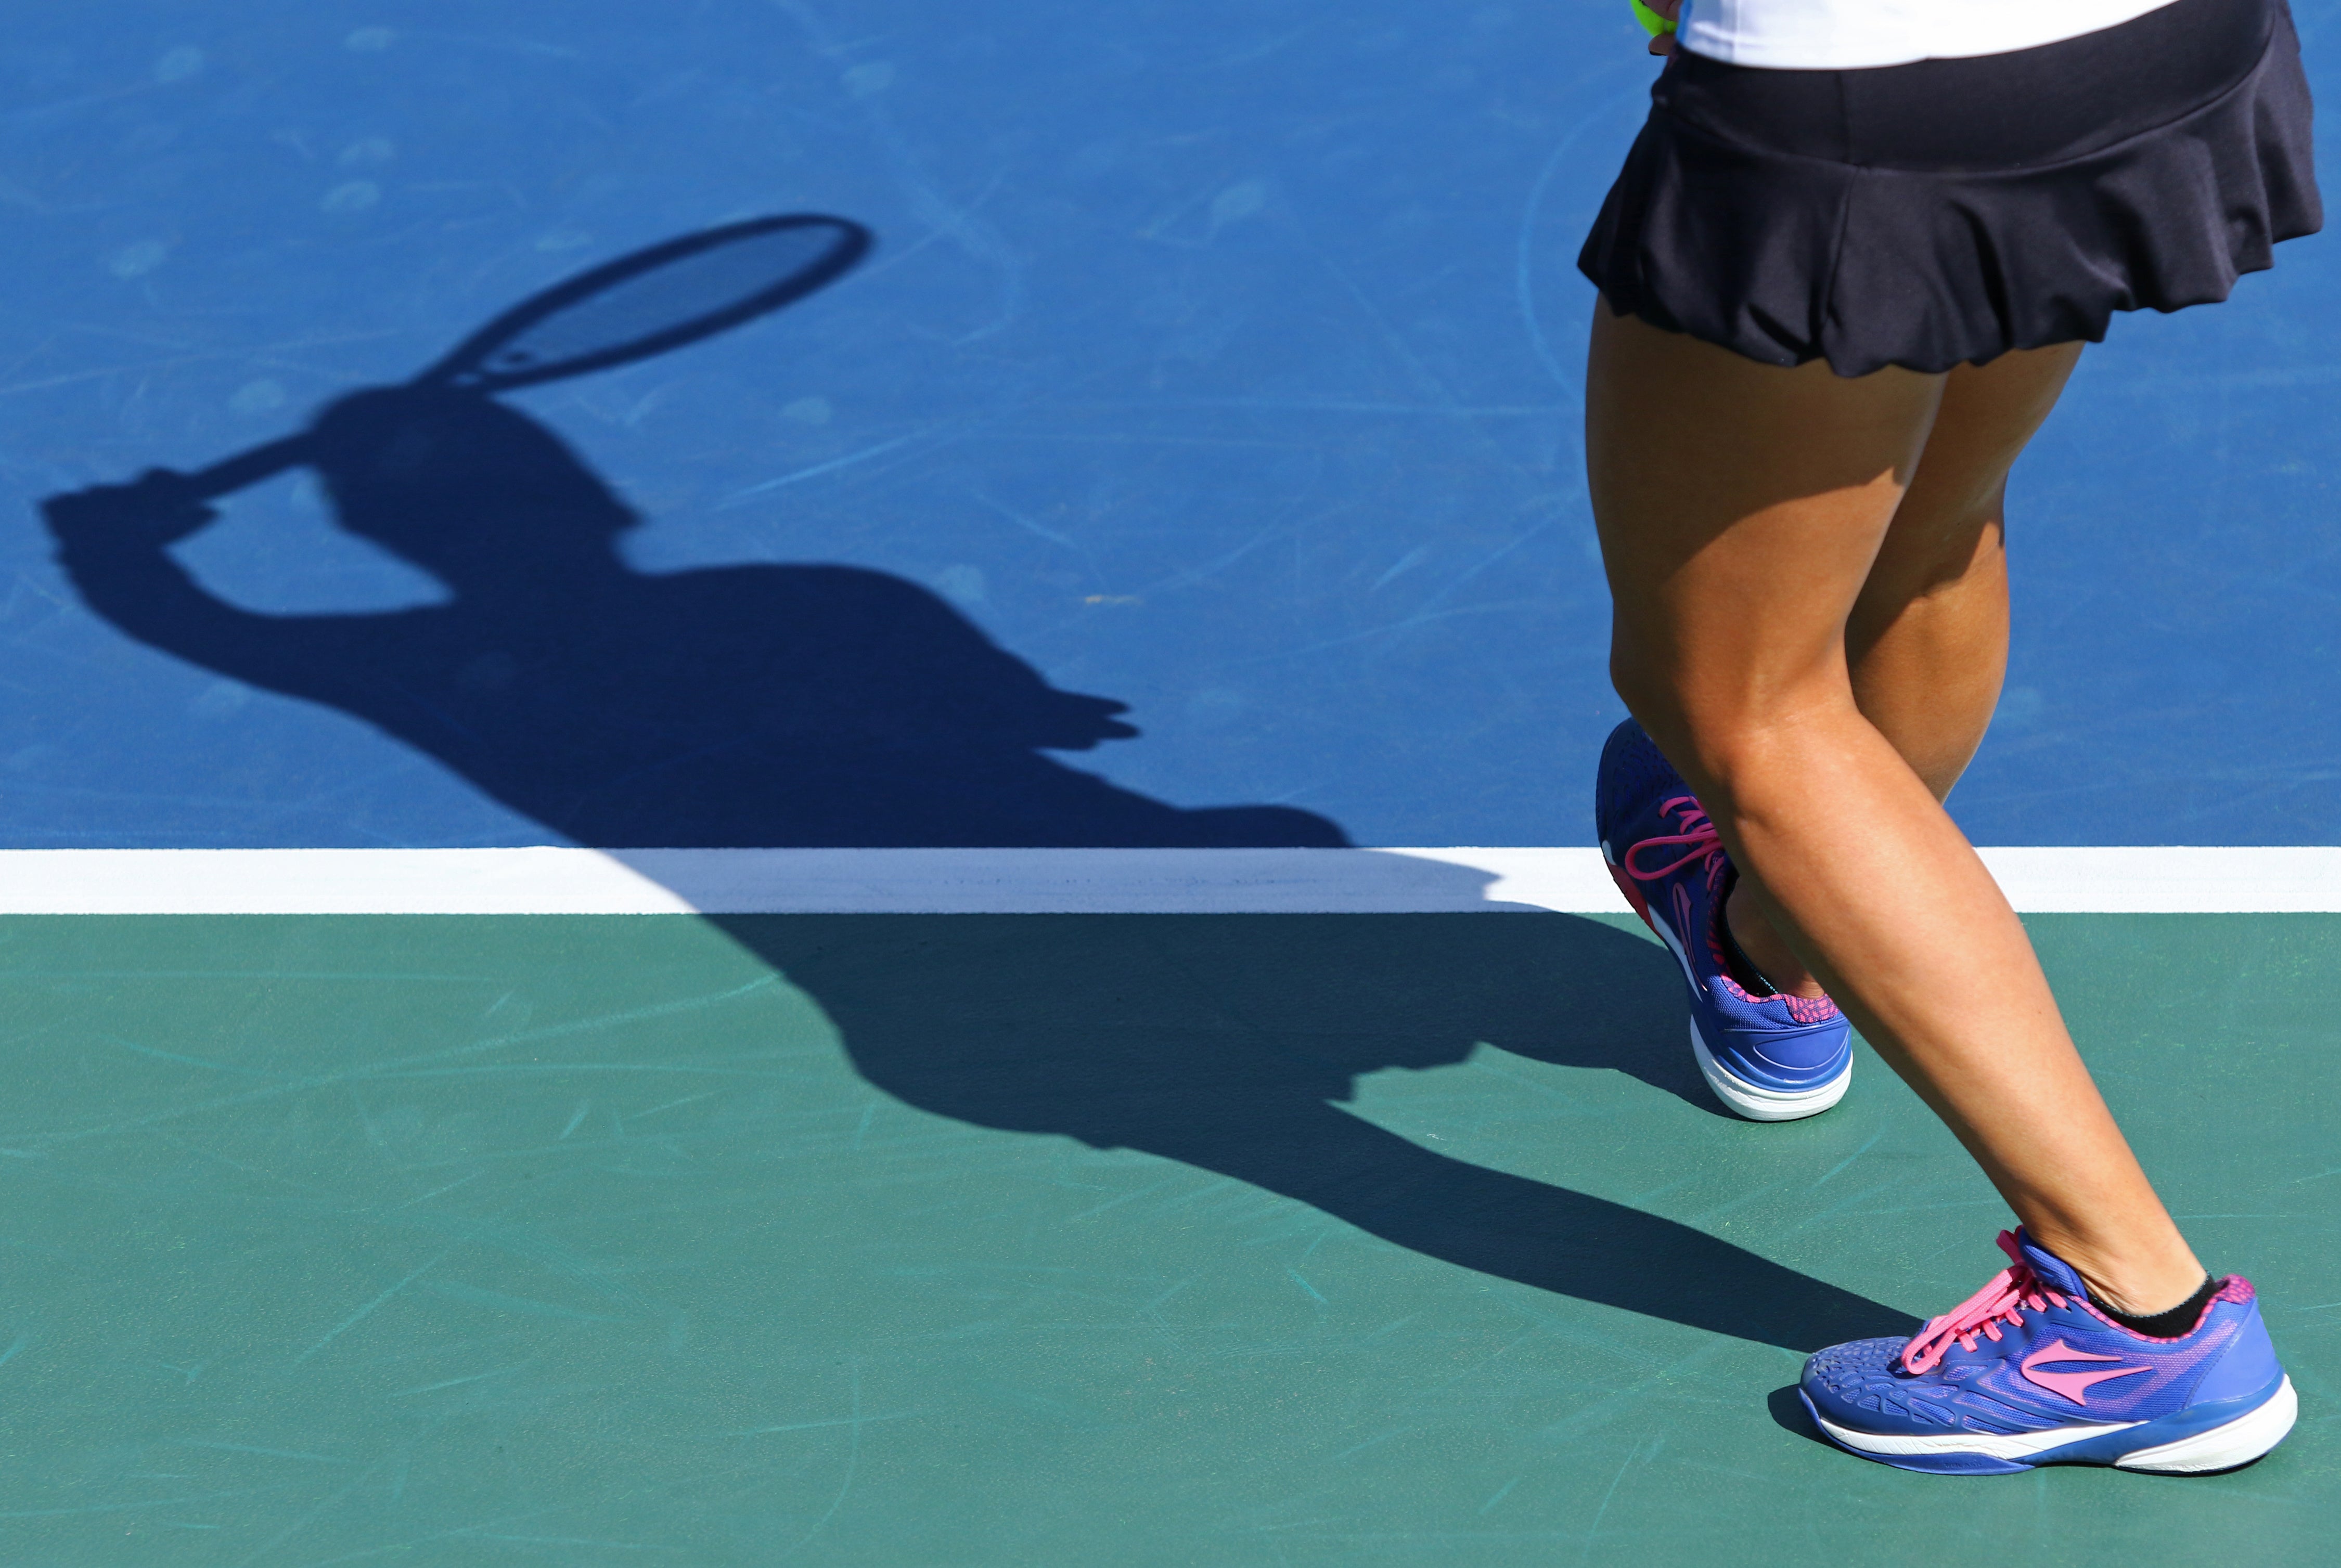 Woman's legs and sneakers close to the baseline on tennis court